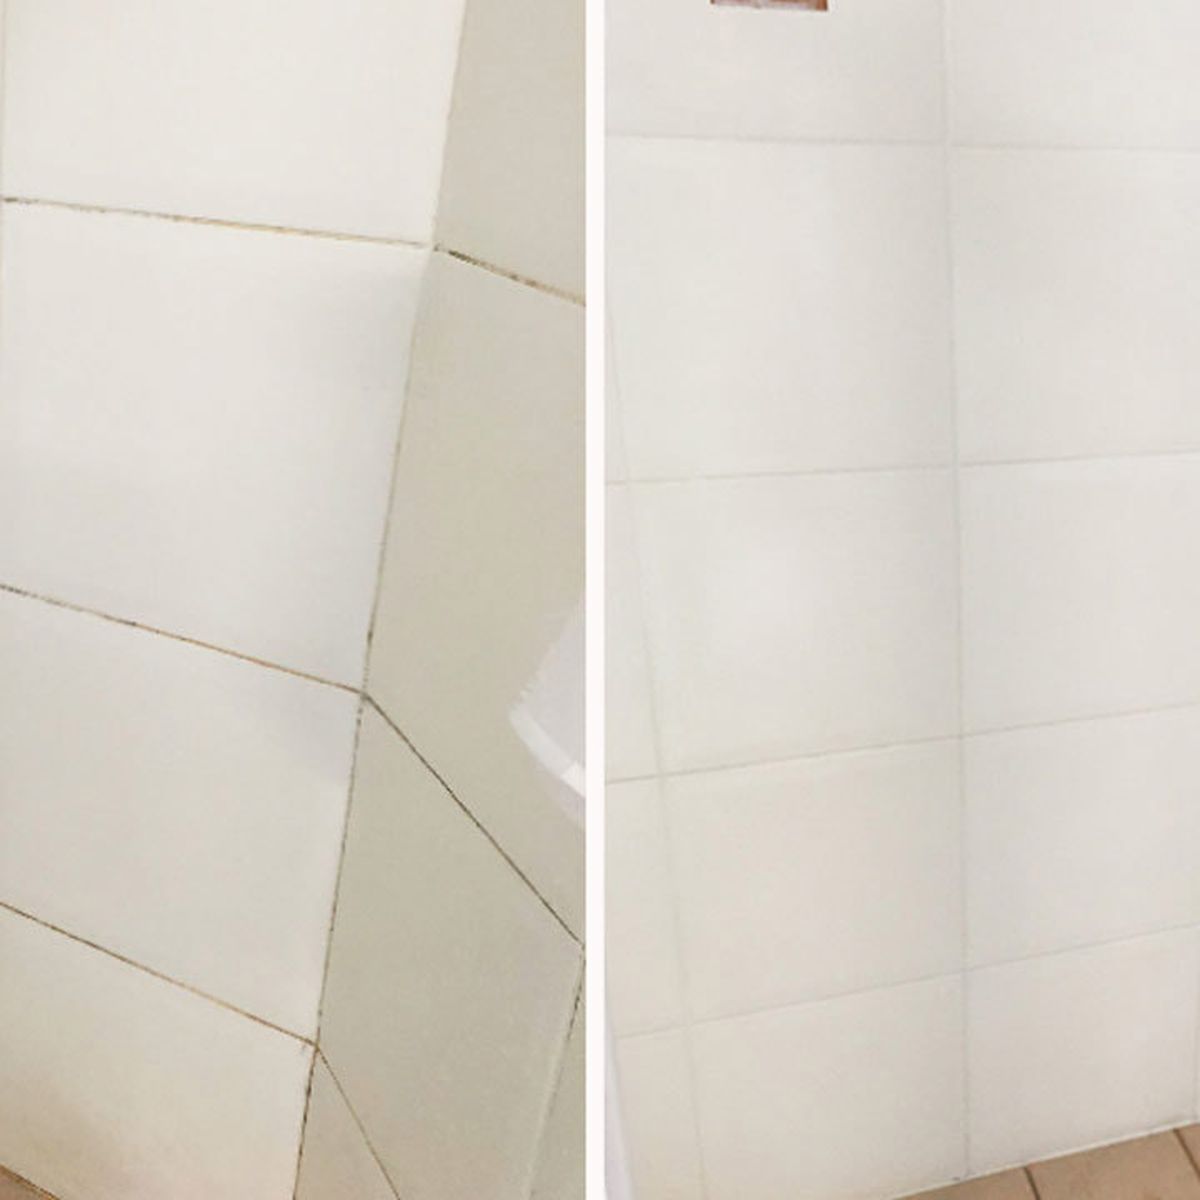 Cleaning Grout – Keeping a New Bathroom Looking New – Nifty Mom